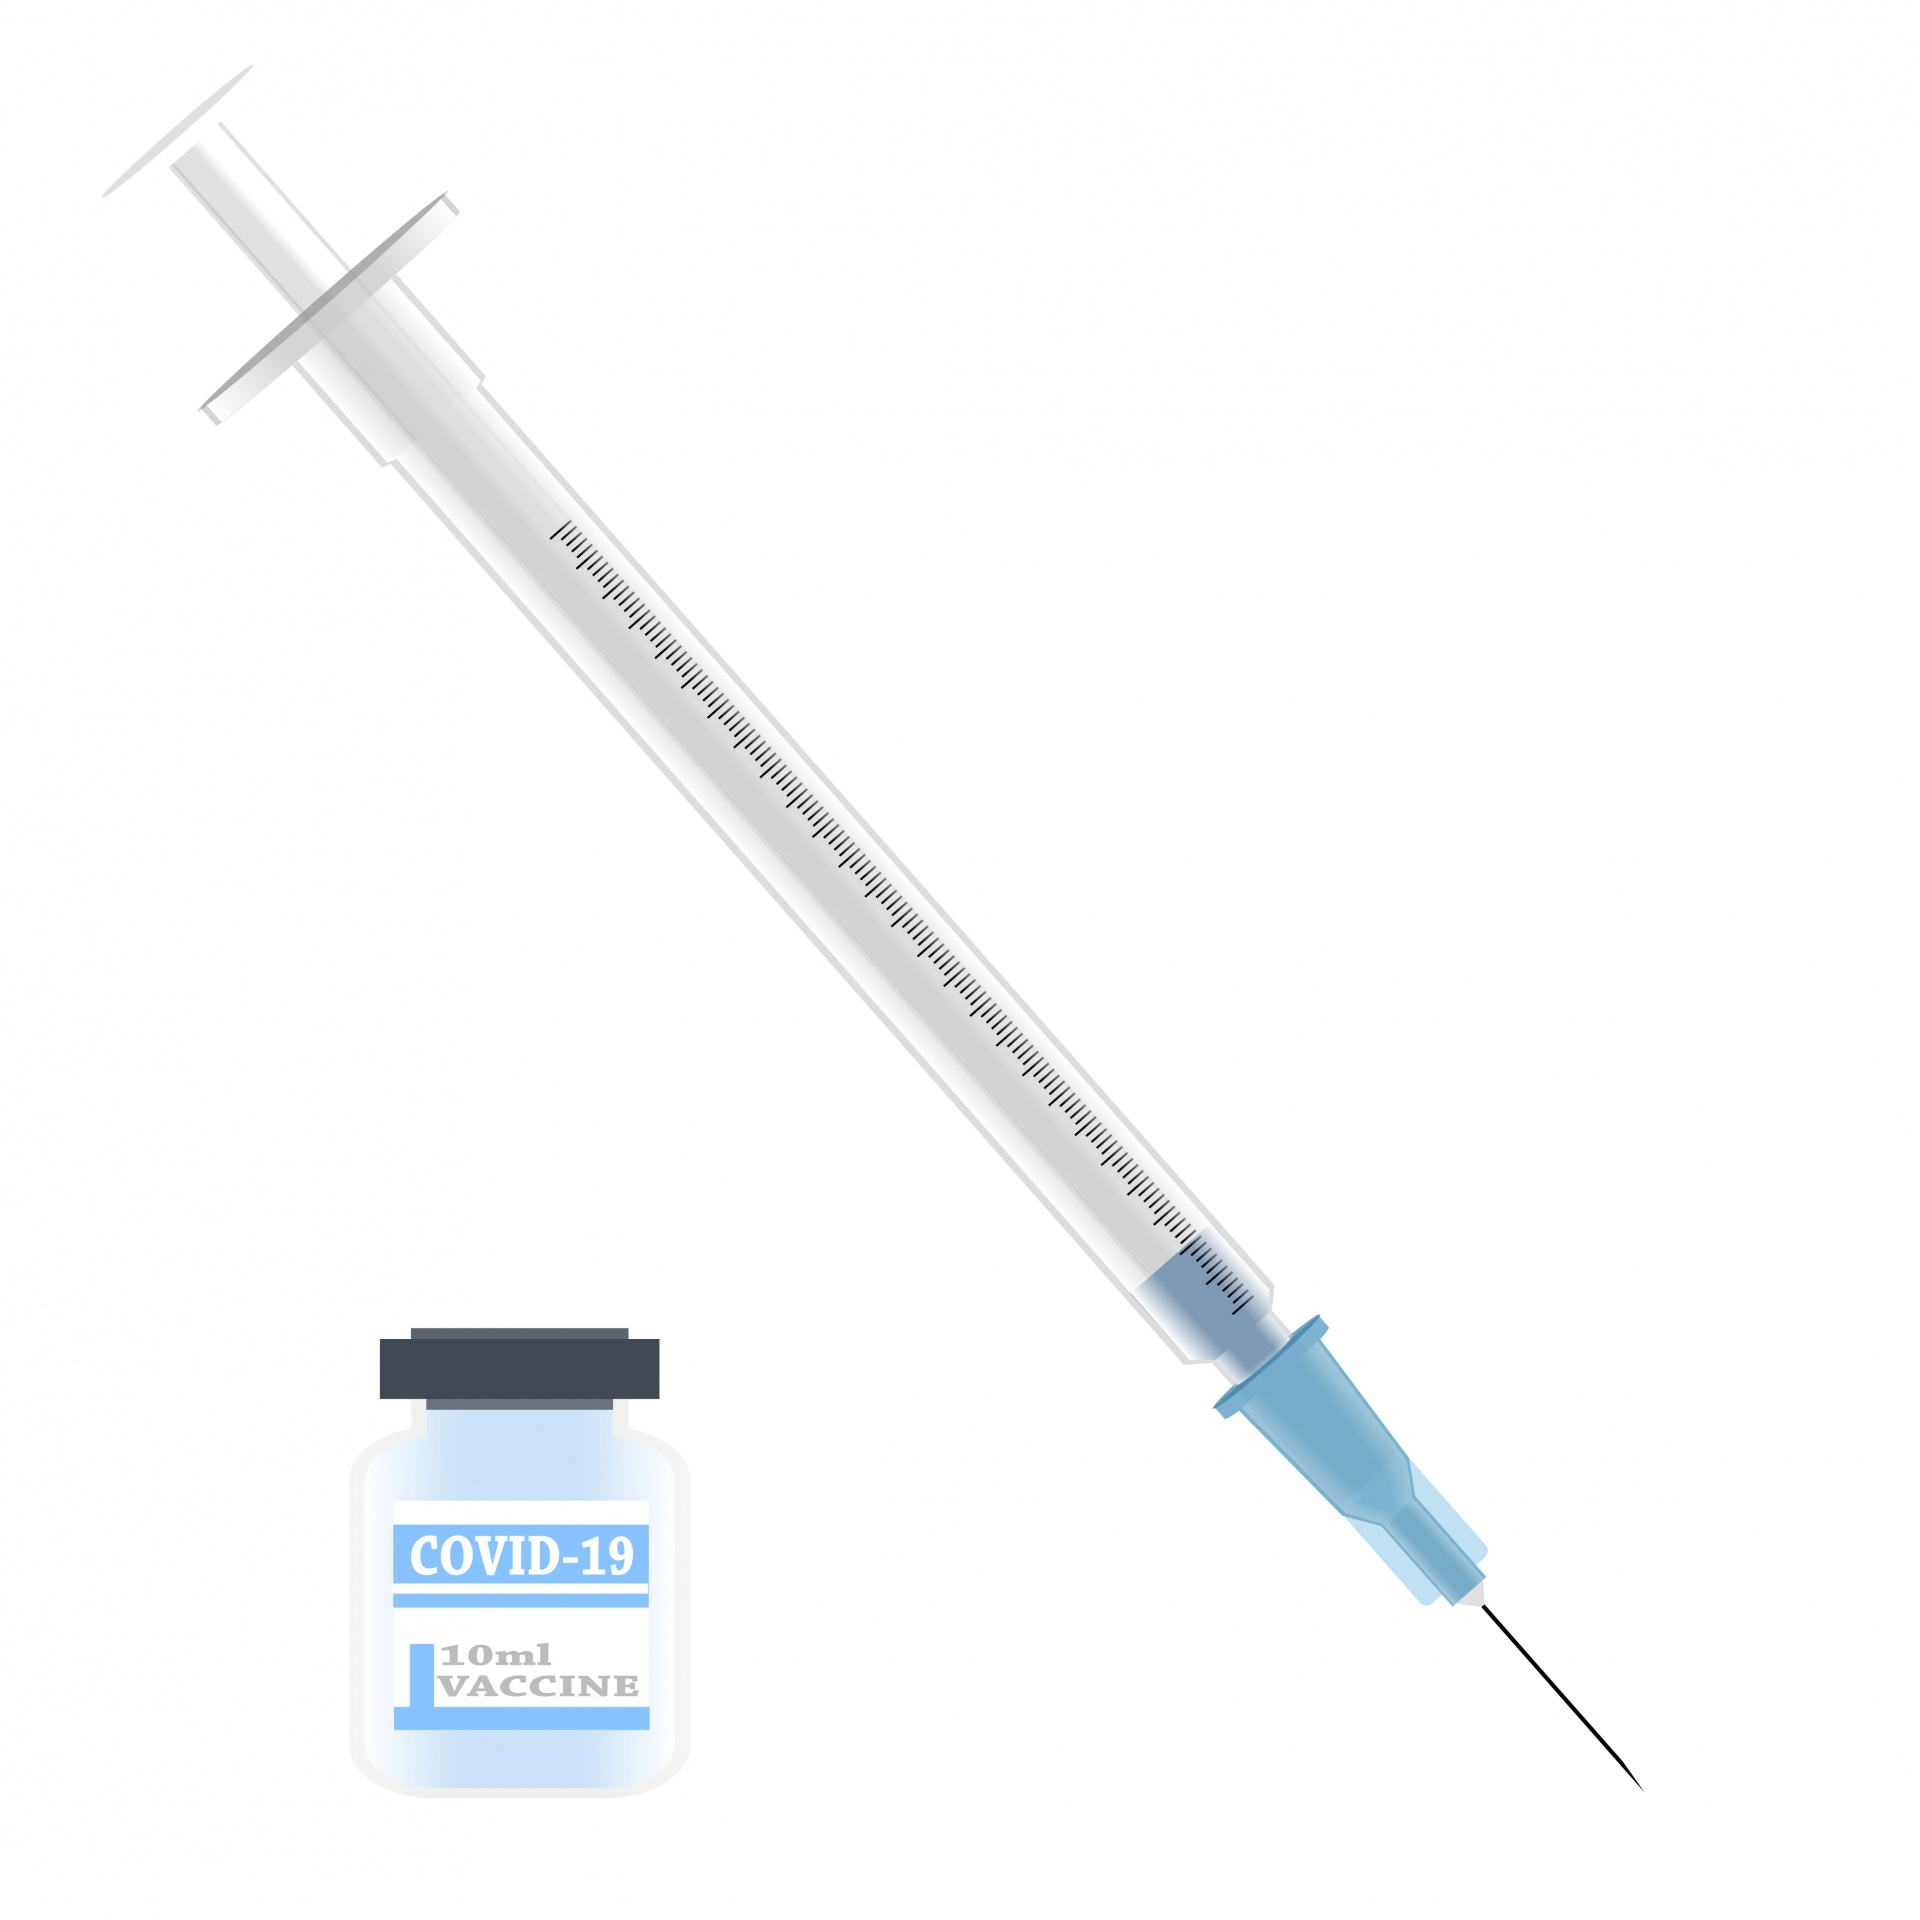 Vector illustration of a syringe with hypodermic needle for vaccination against covid-19 clipart on white background